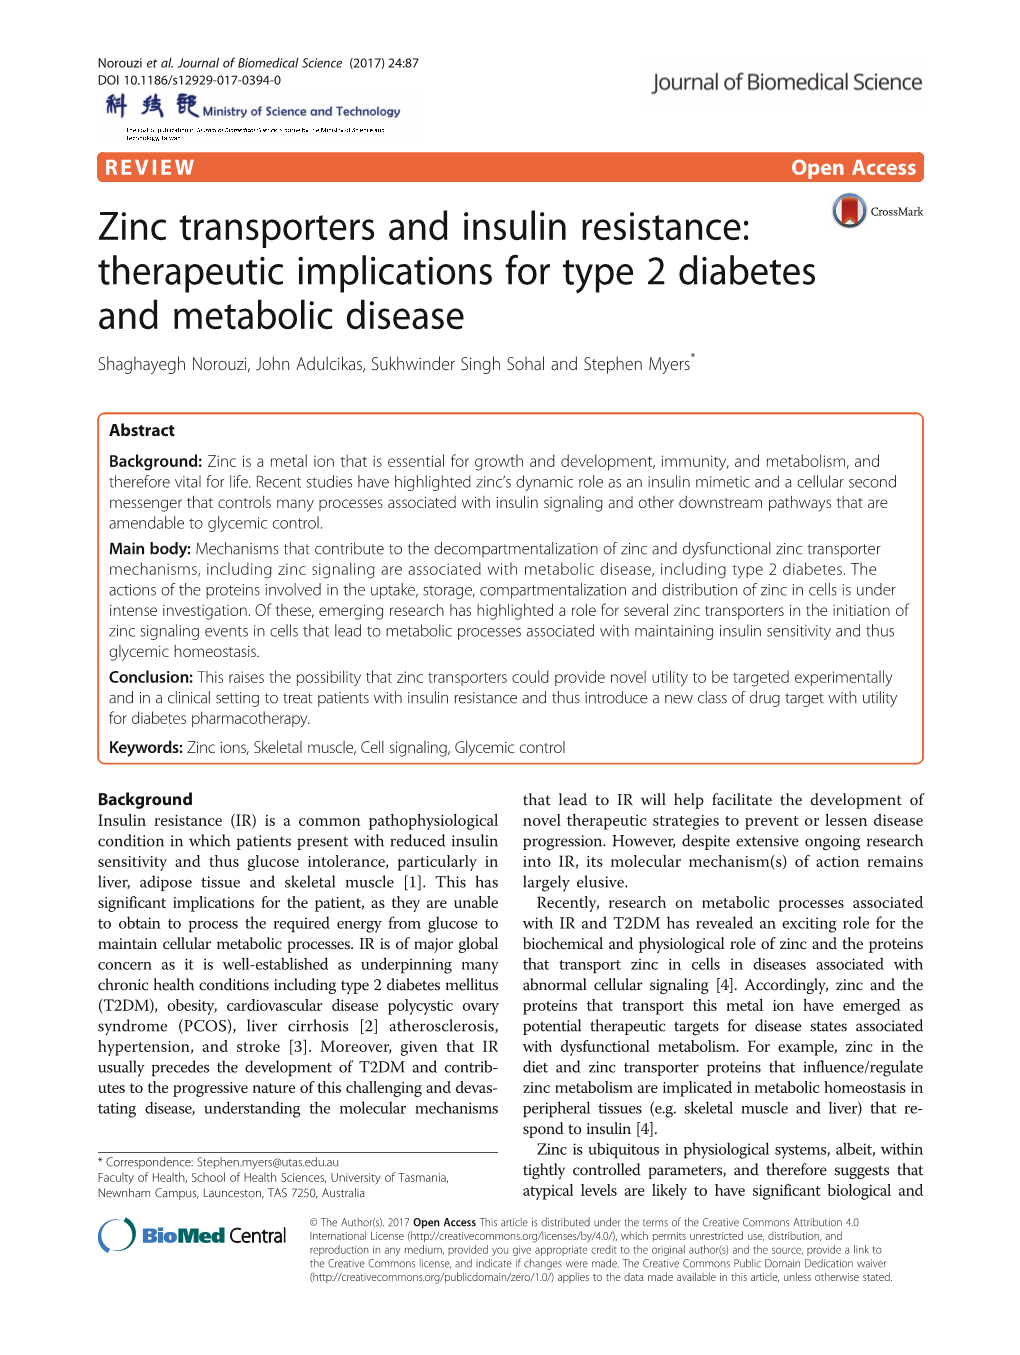 Zinc Transporters and Insulin Resistance: Therapeutic Implications